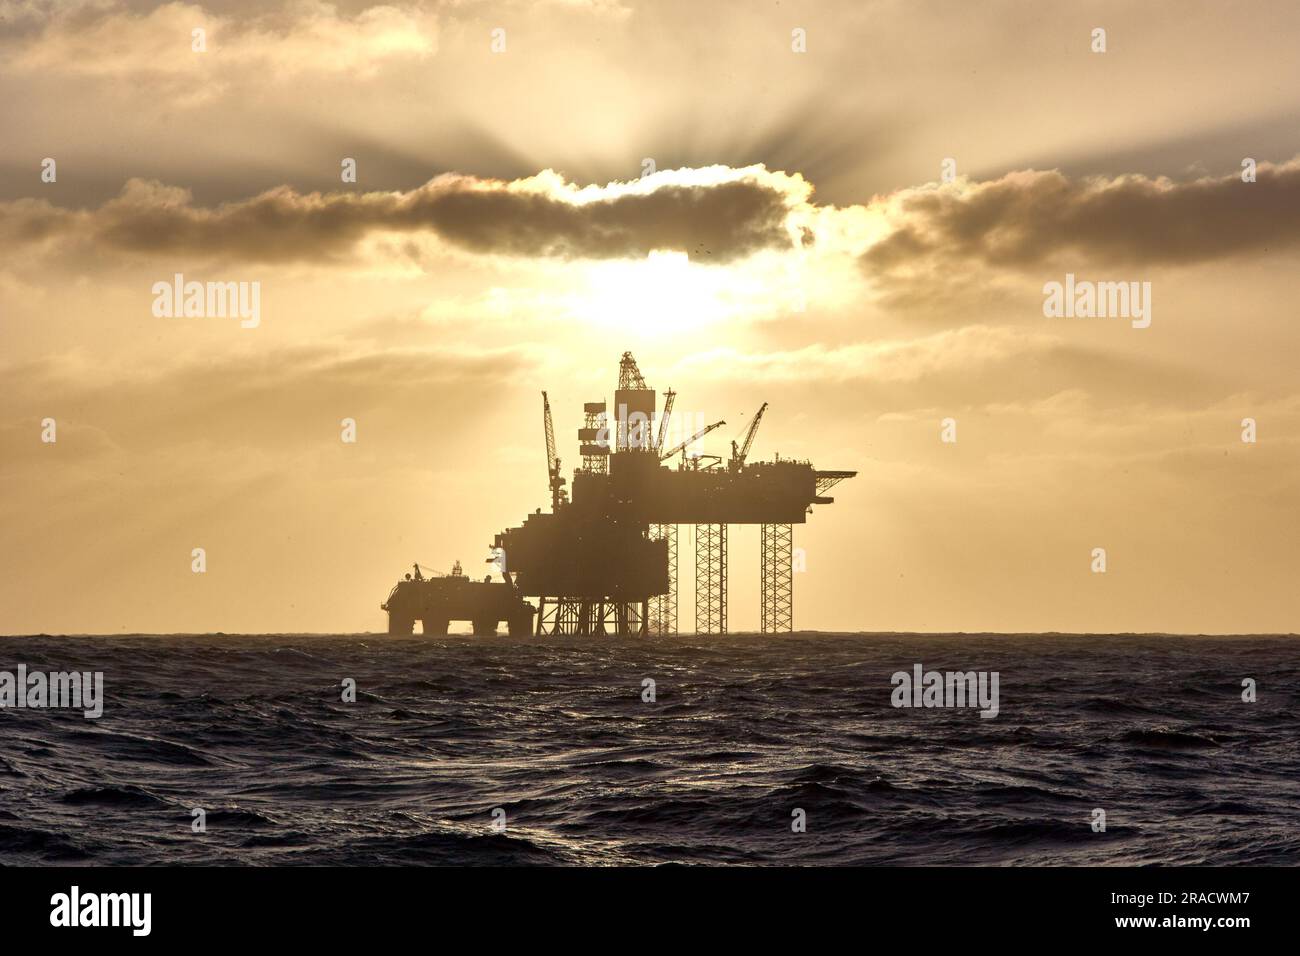 Silhouette of a jack up drilling rig in the North Sea at sunset. North sea offshore platform for oil and gas. Stock Photo